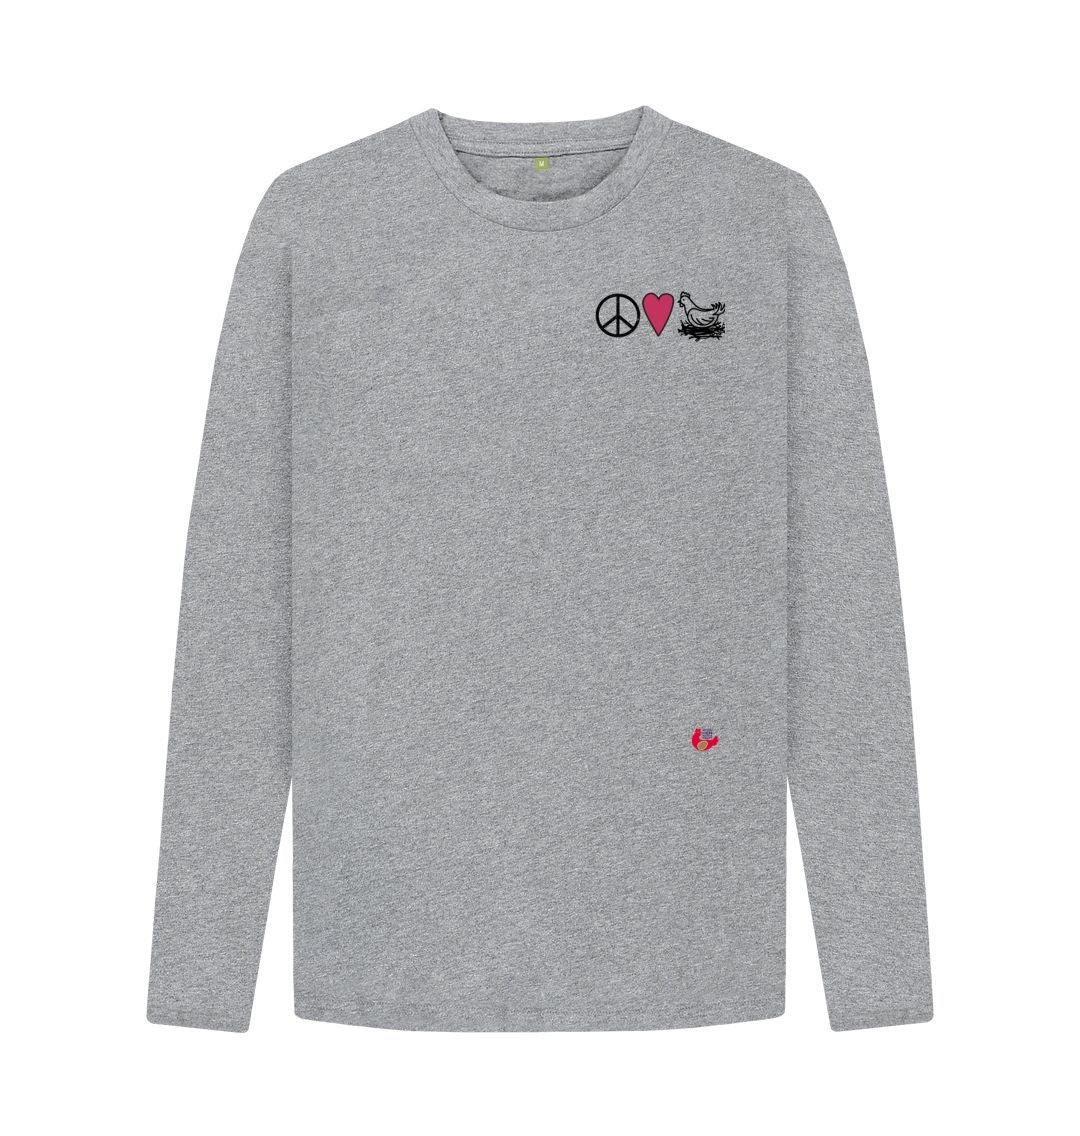 Athletic Grey Men's Long Sleeve T-Shirt - Peace, Love & Chickens - Small Logo